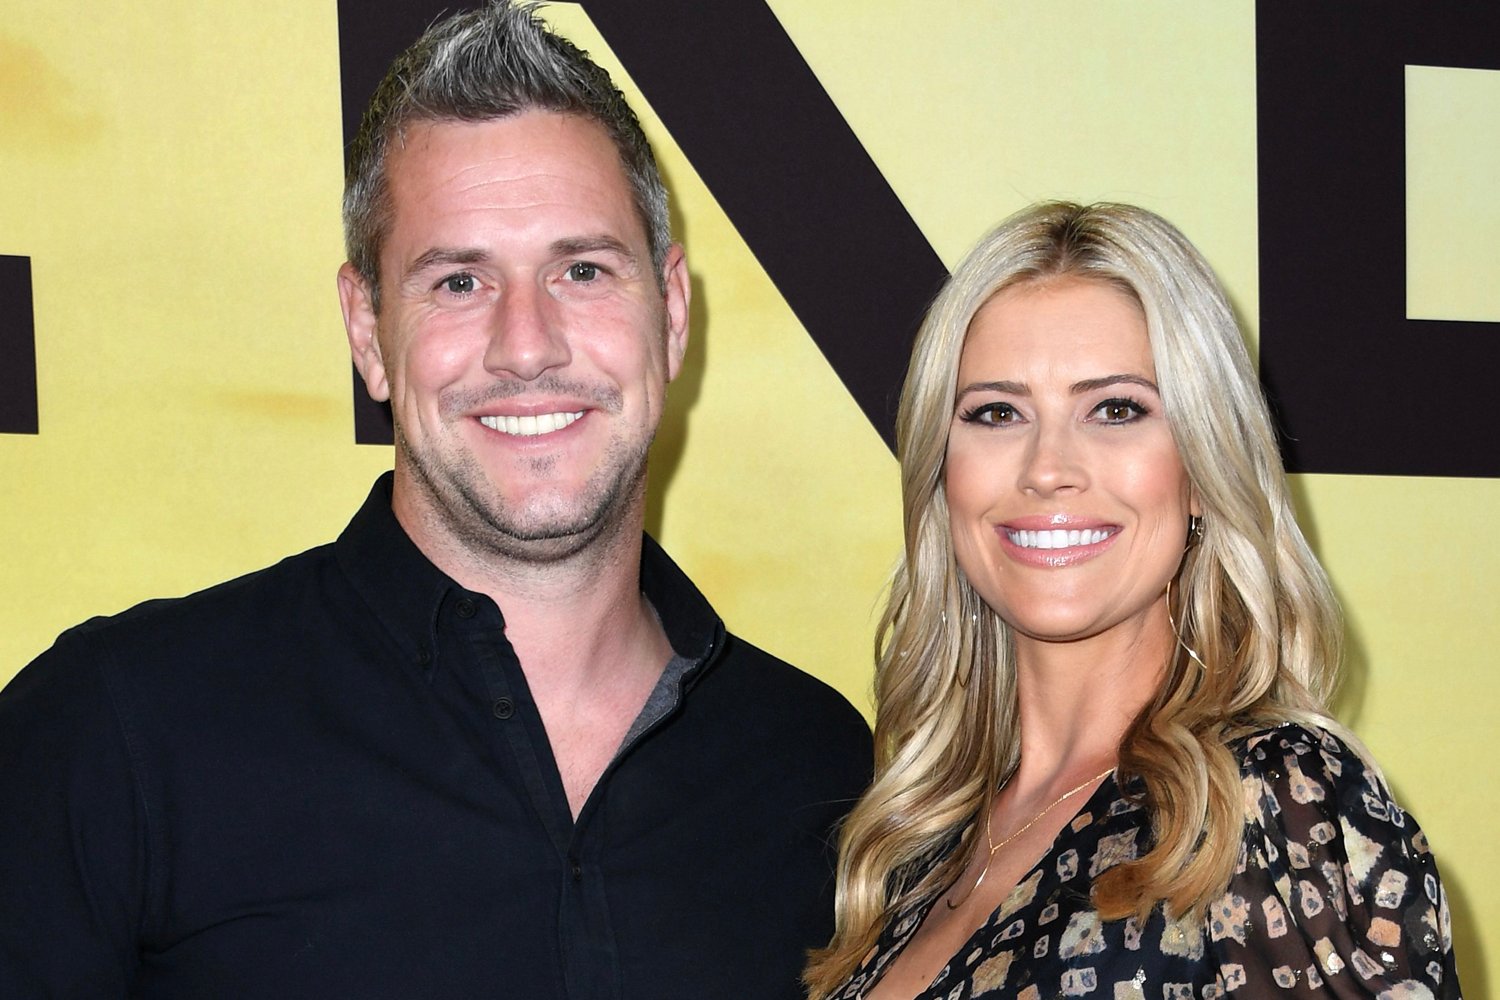 HGTV Star Christina Anstead Says She's Not in a Contest With Ant ...